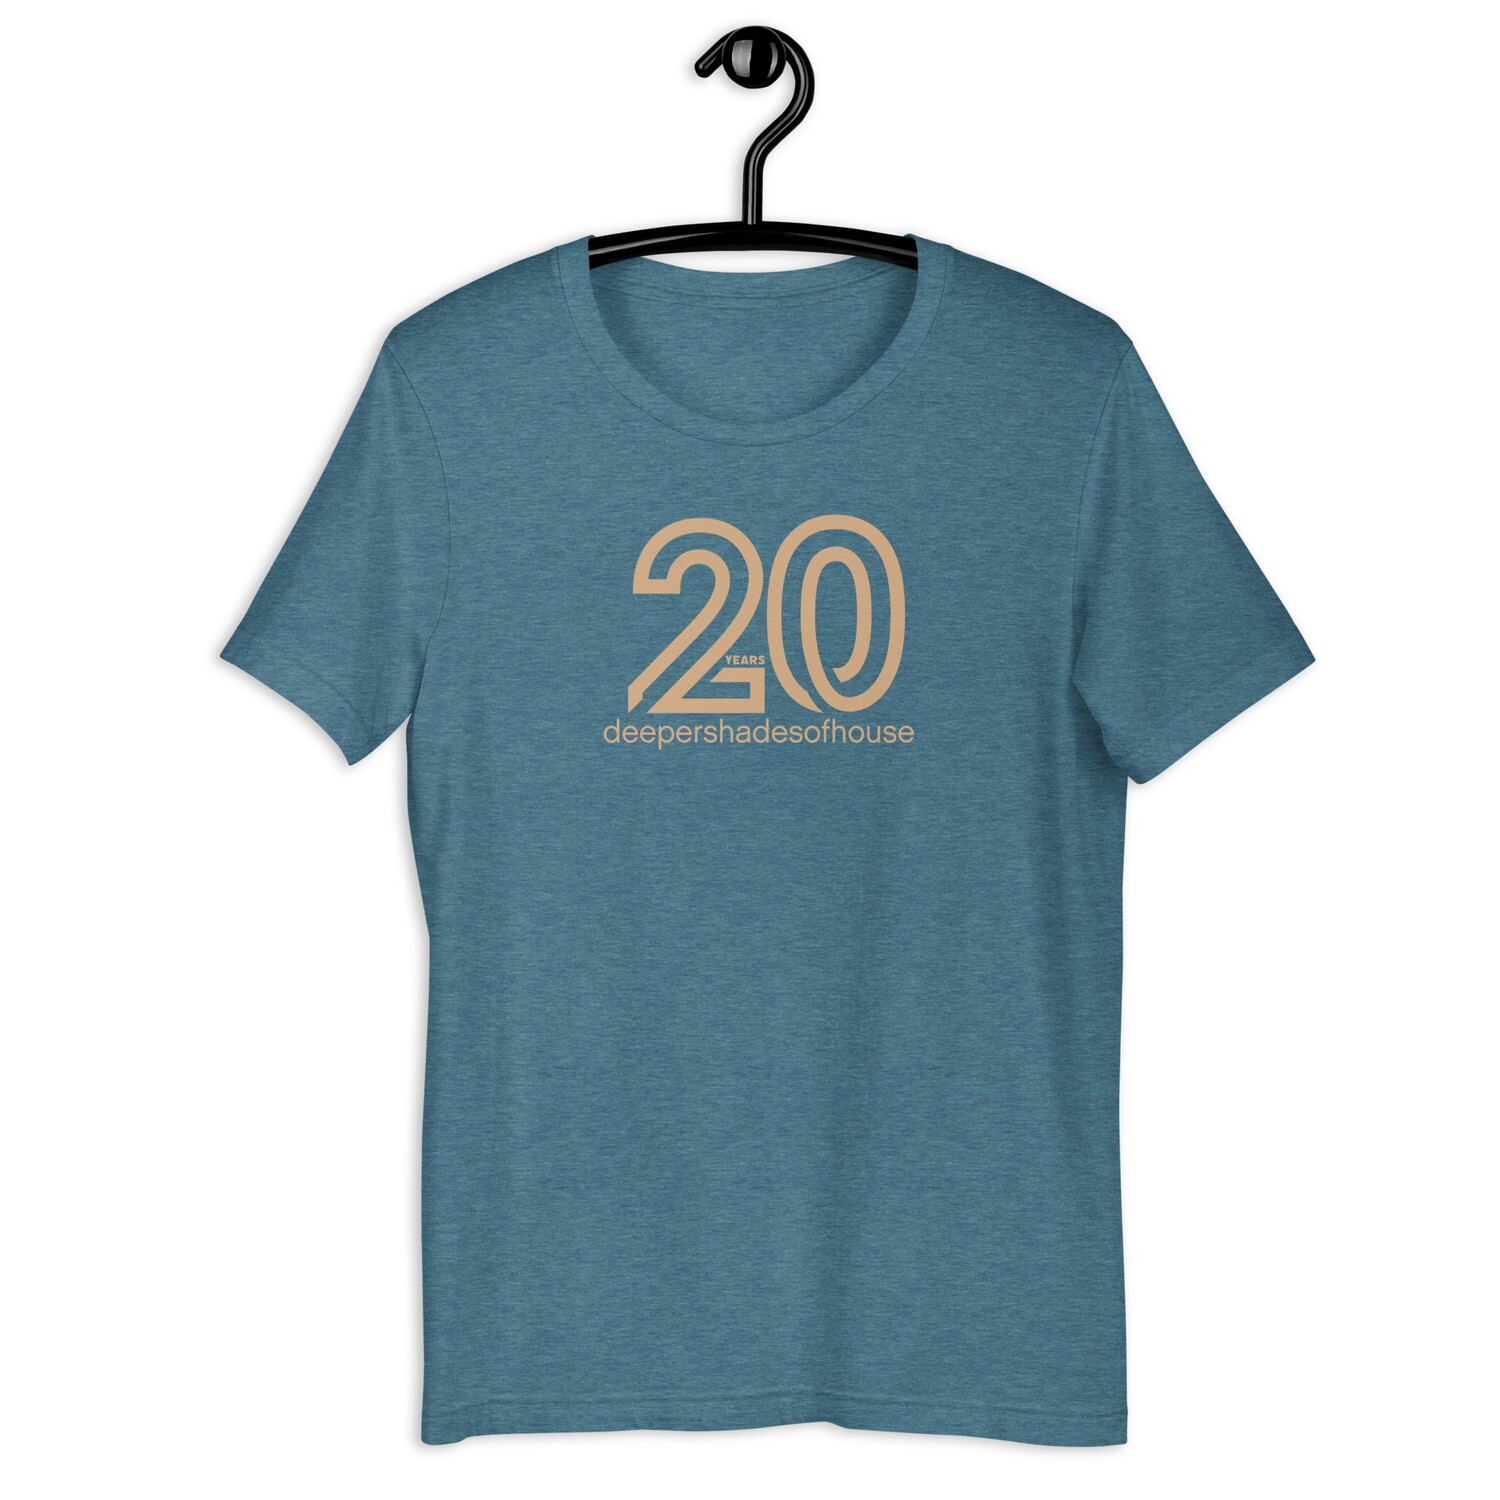 NEW DROP - 20 YEARS DEEPER SHADES OF HOUSE Unisex T-Shirt